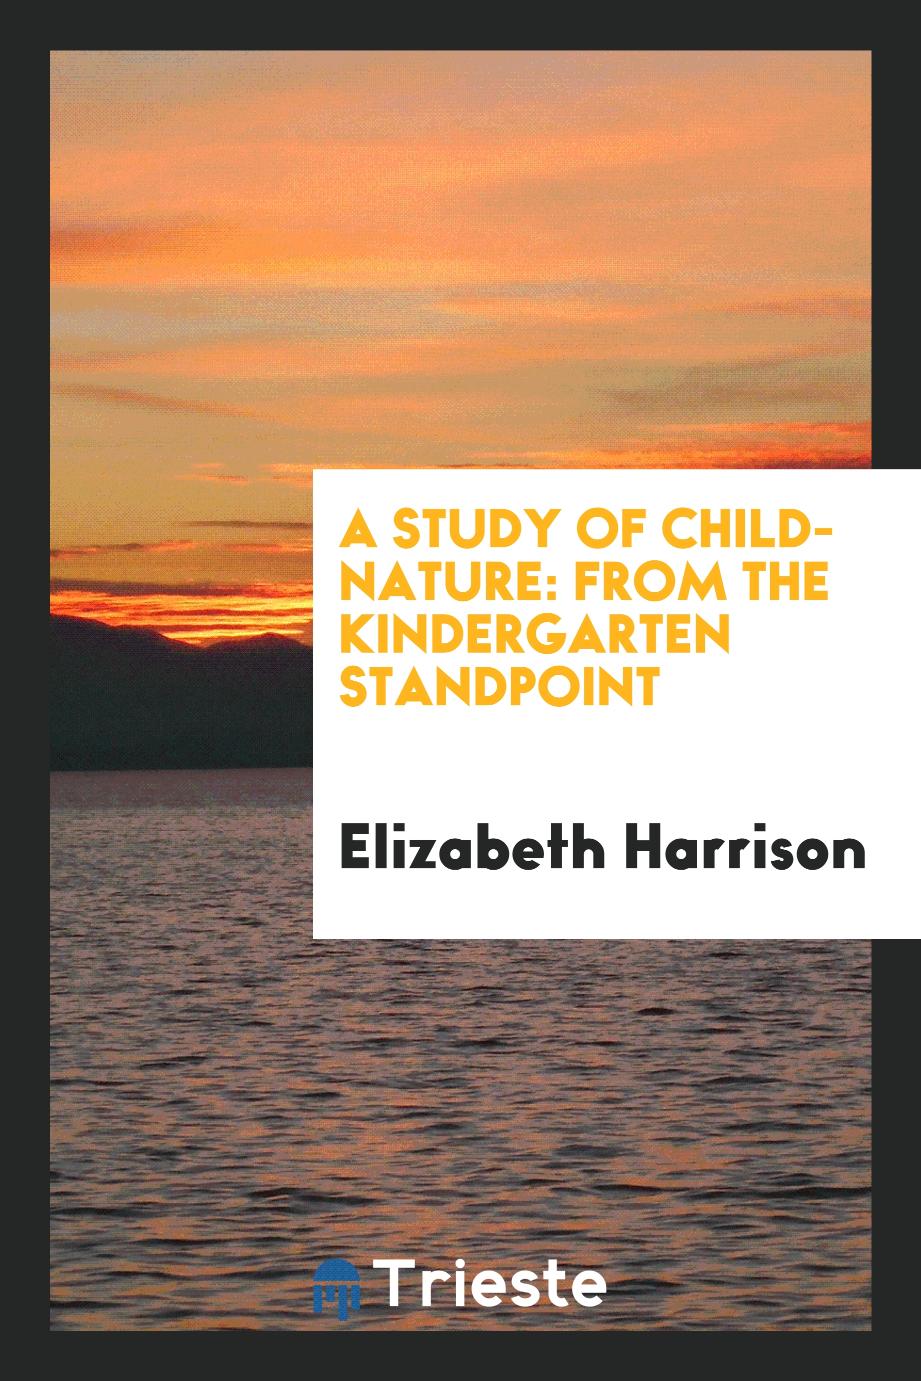 A Study of Child-Nature: from the Kindergarten Standpoint